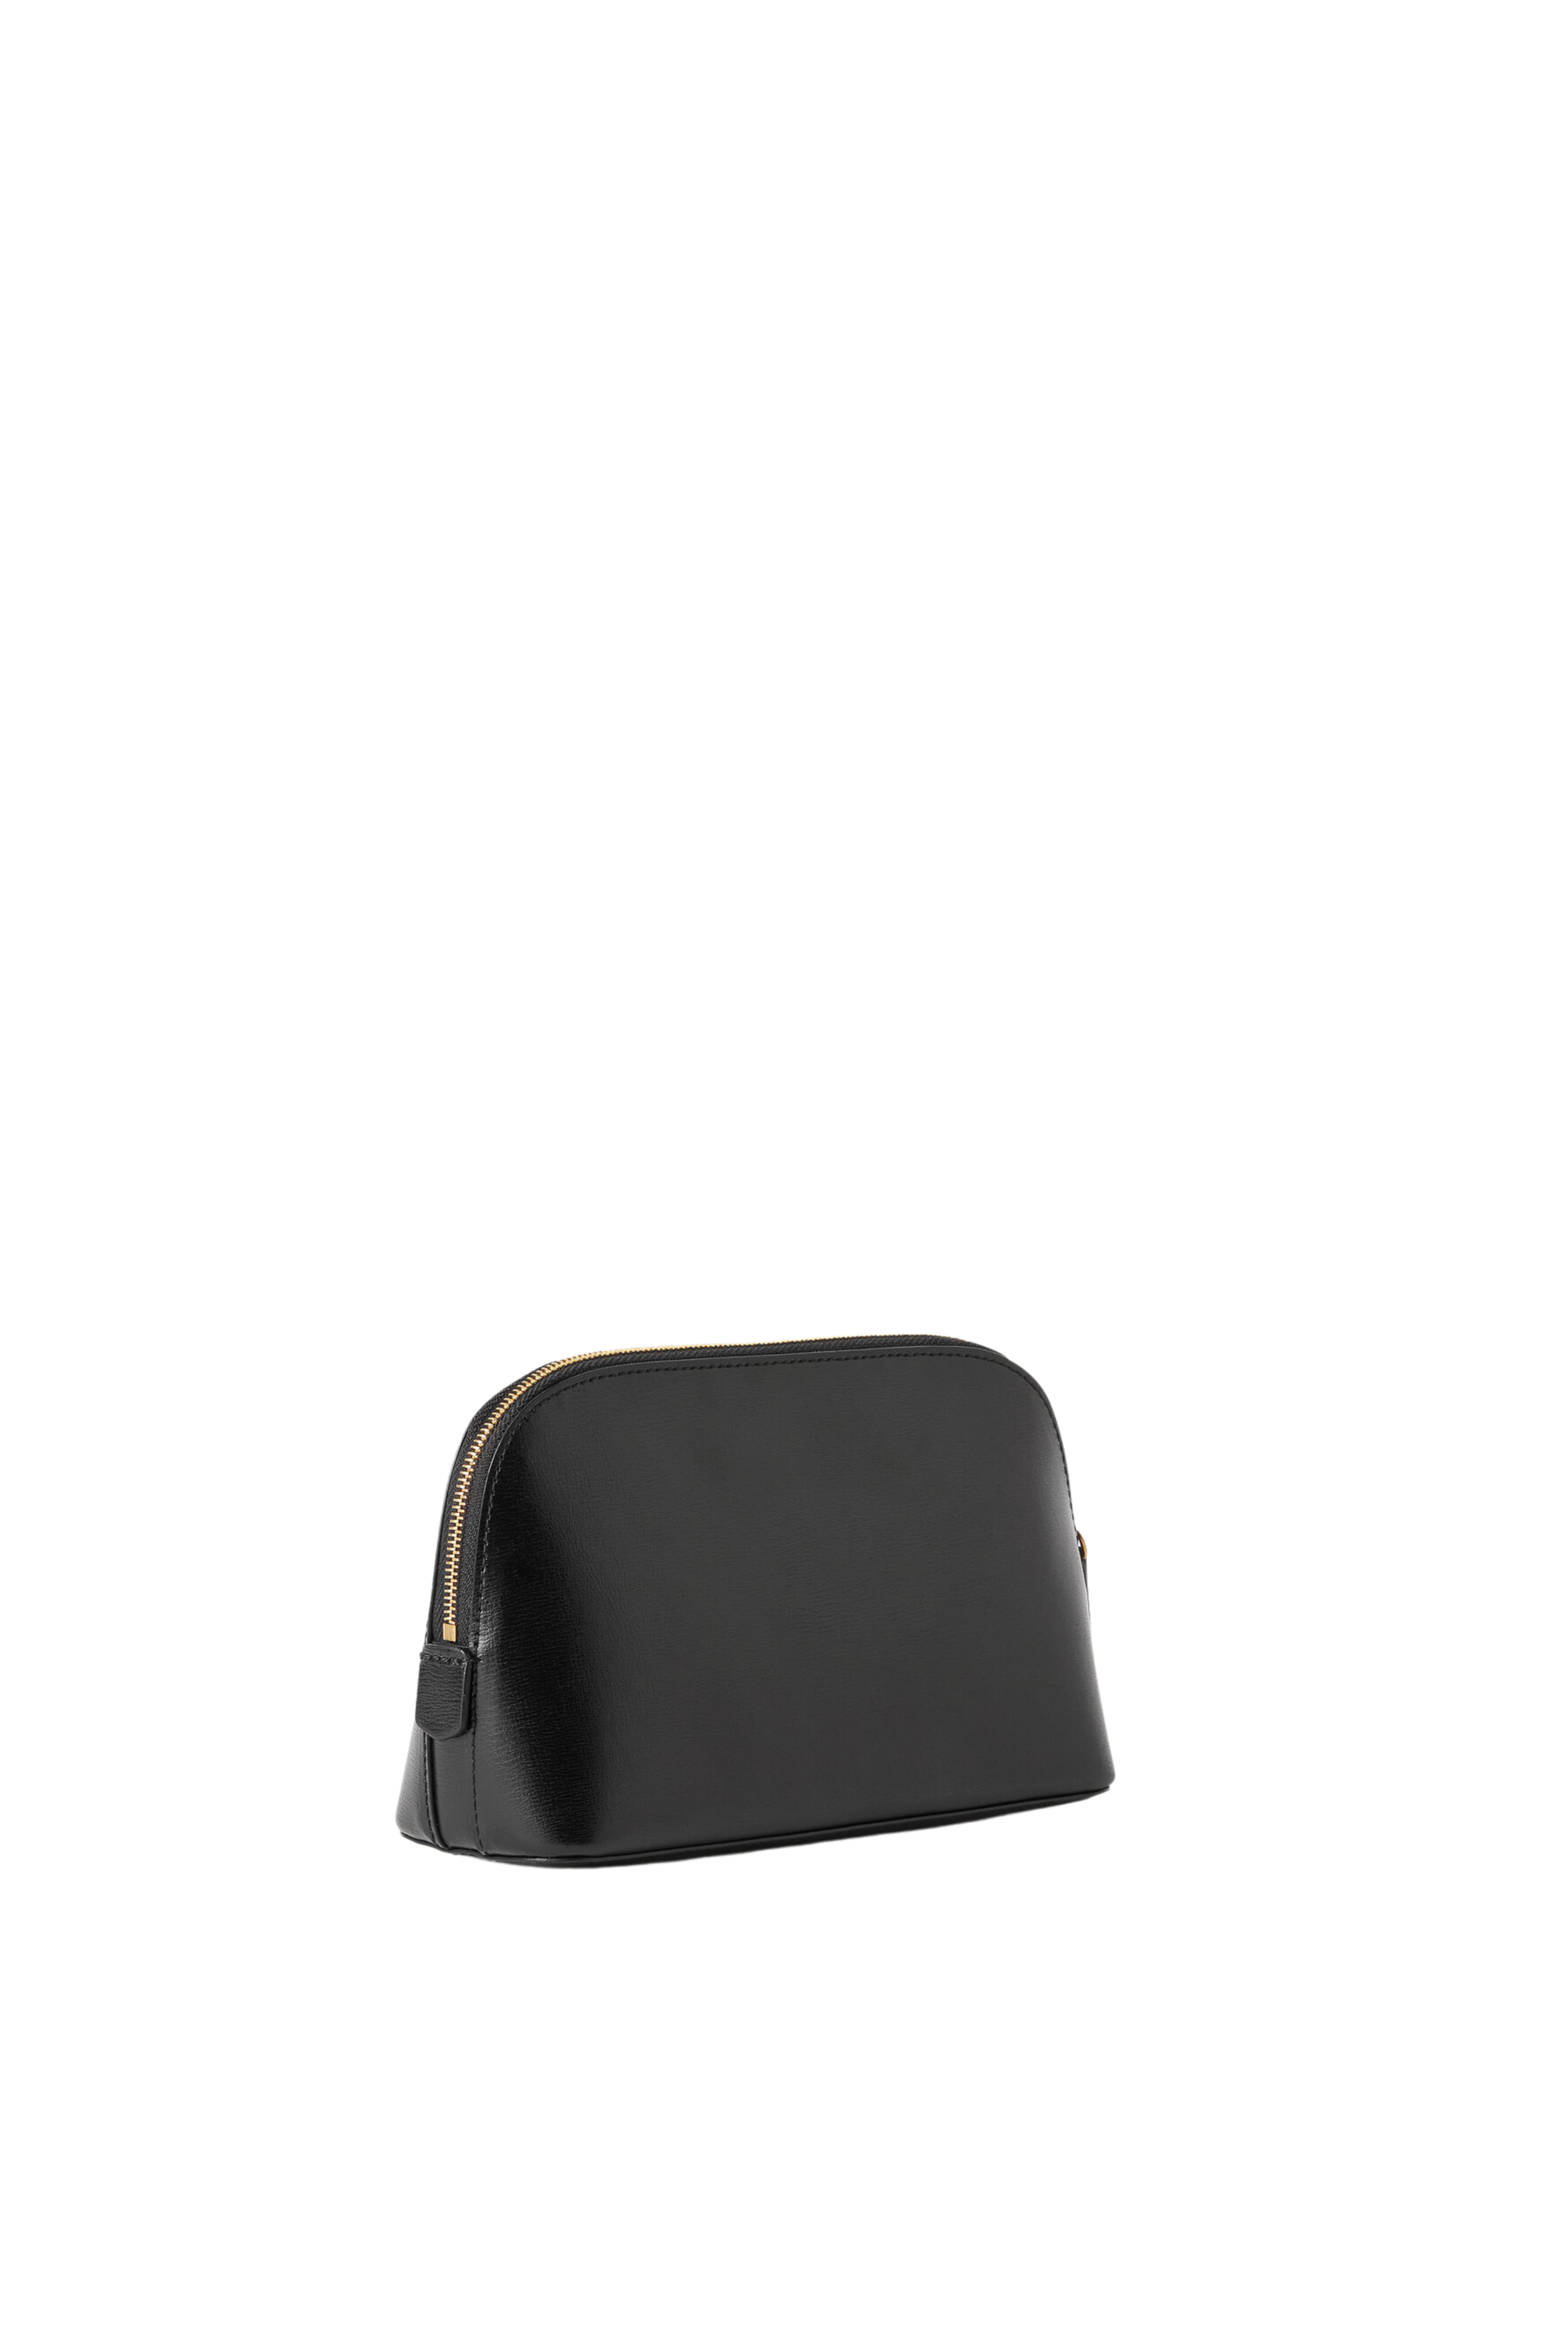 BY MALENE BIRGER Aya Small Makeup Pouch in Black